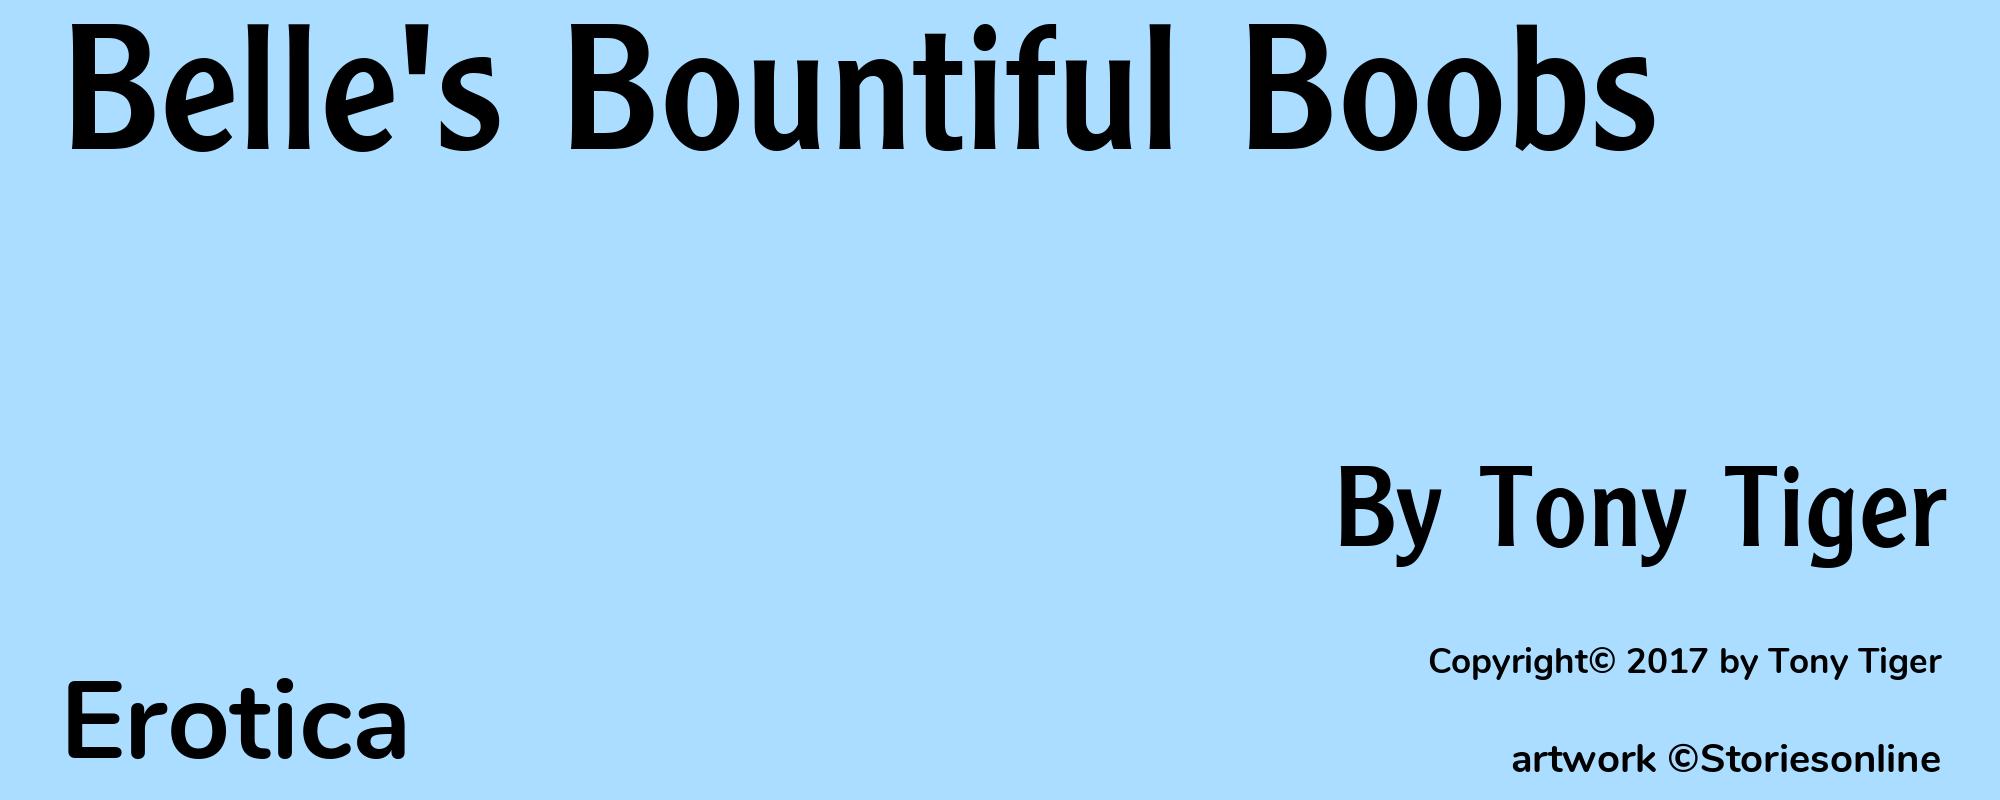 Belle's Bountiful Boobs - Cover